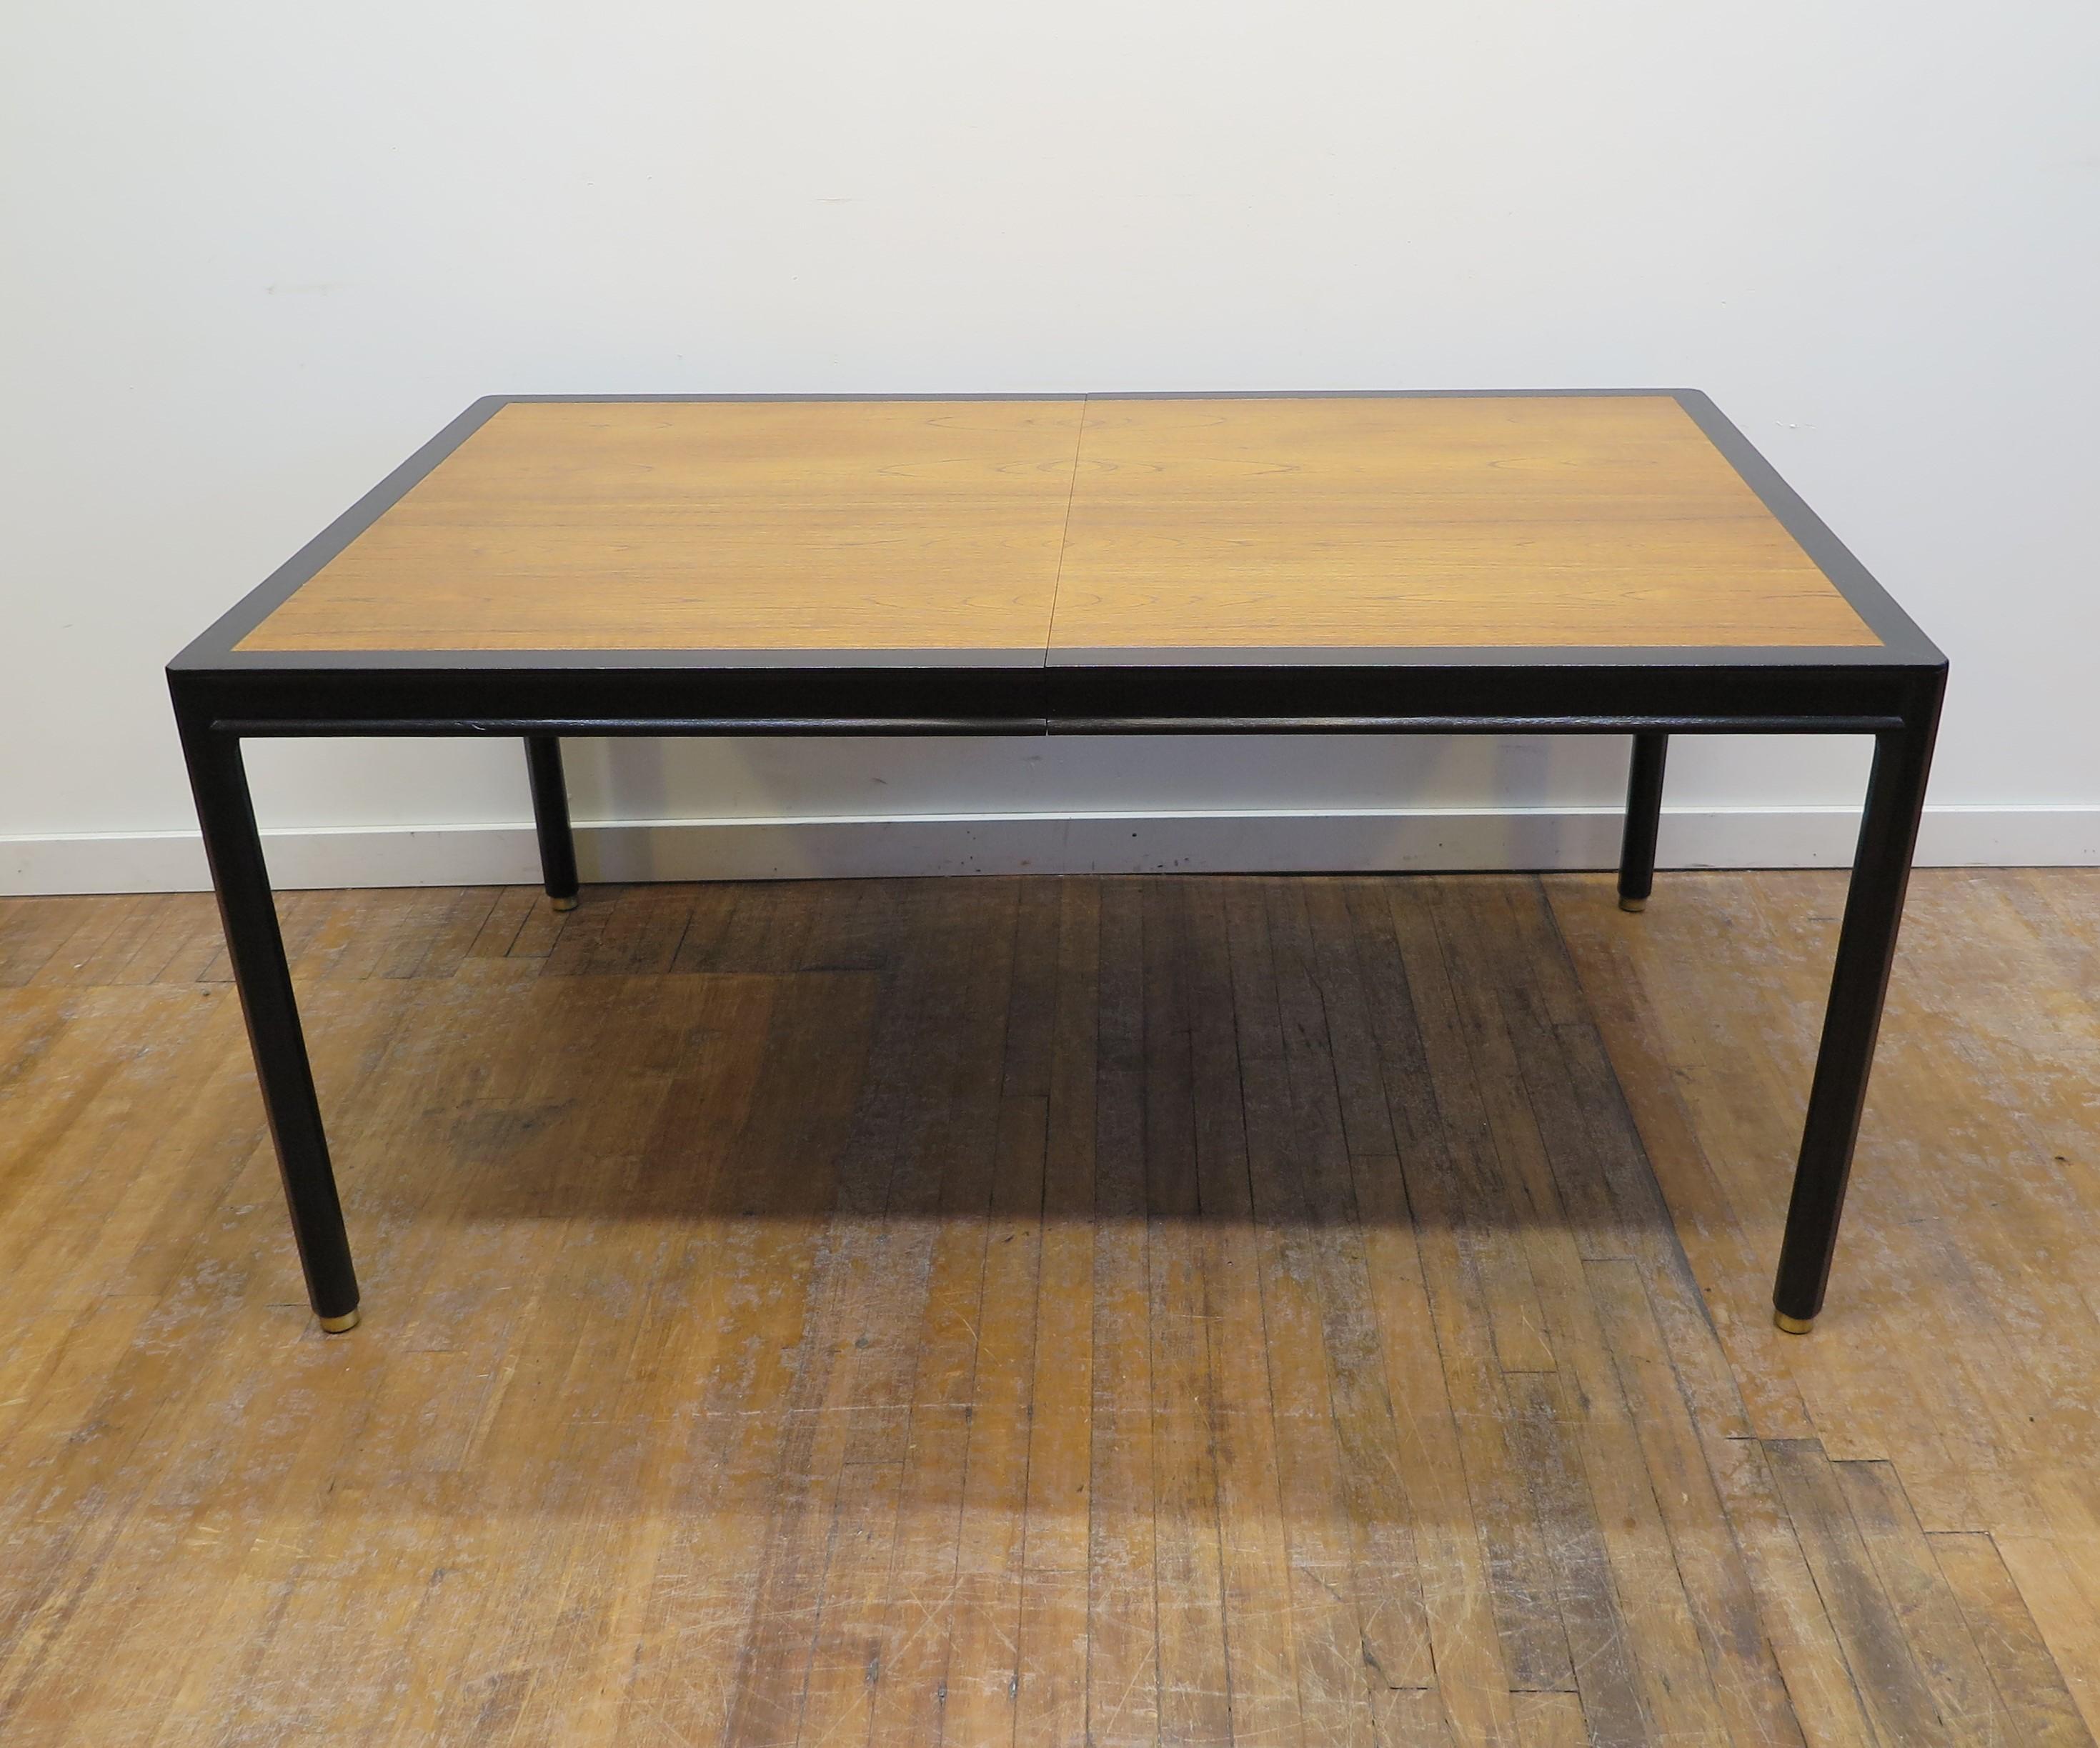 Mid-Century Modern dinning table by Harvey Probber. Harvey Probber dinning table ebonized Mahogany frame with book-matched Walnut top. Having five Legs with brass detail surrounds on feet. Stunning extension table when closed is 60 inches. Three